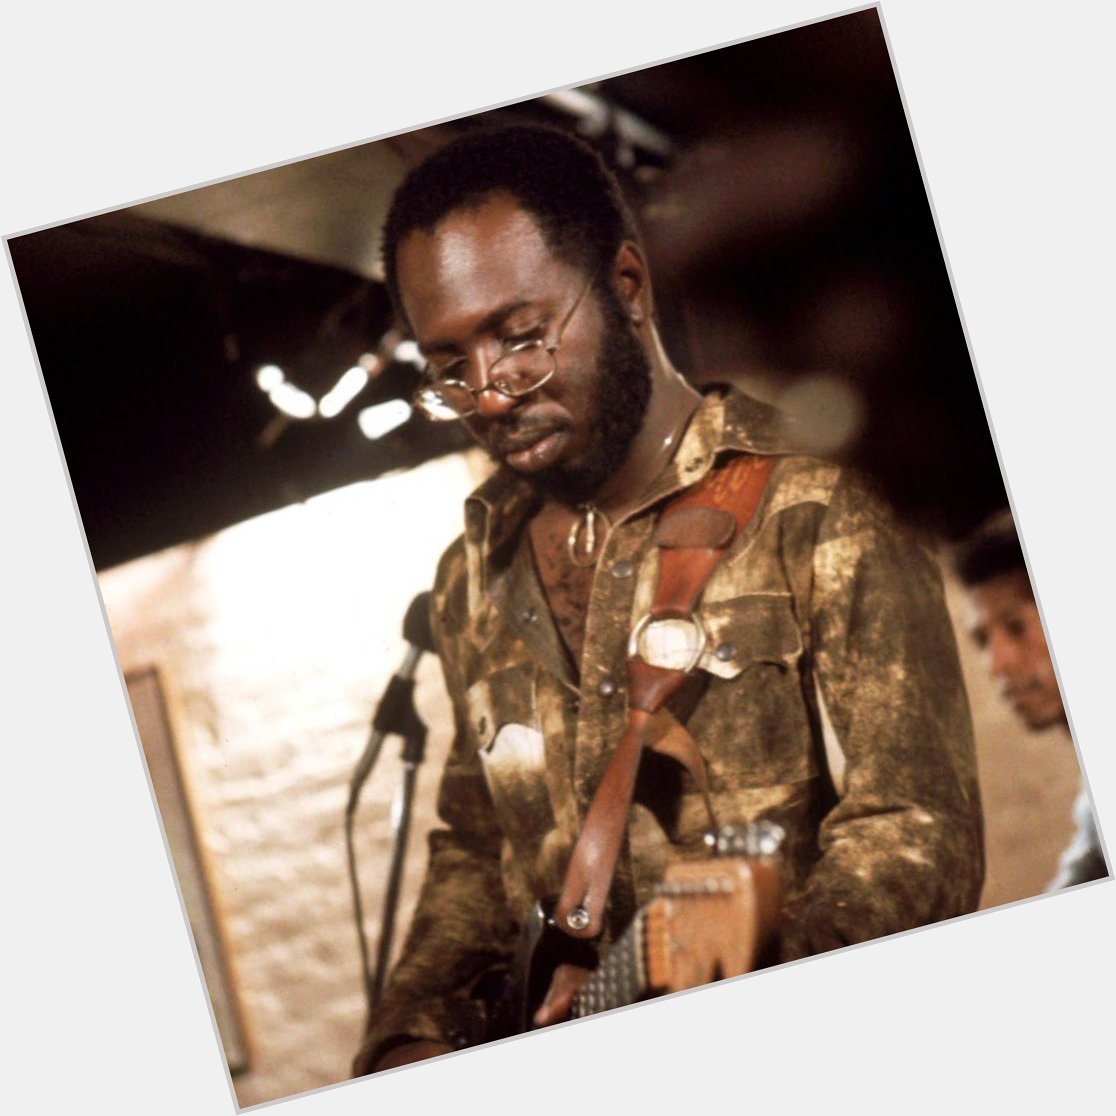 Happy Birthday to Curtis Mayfield who shouod be celebrating his 80th. One of the greatest to pickup a guitar. 